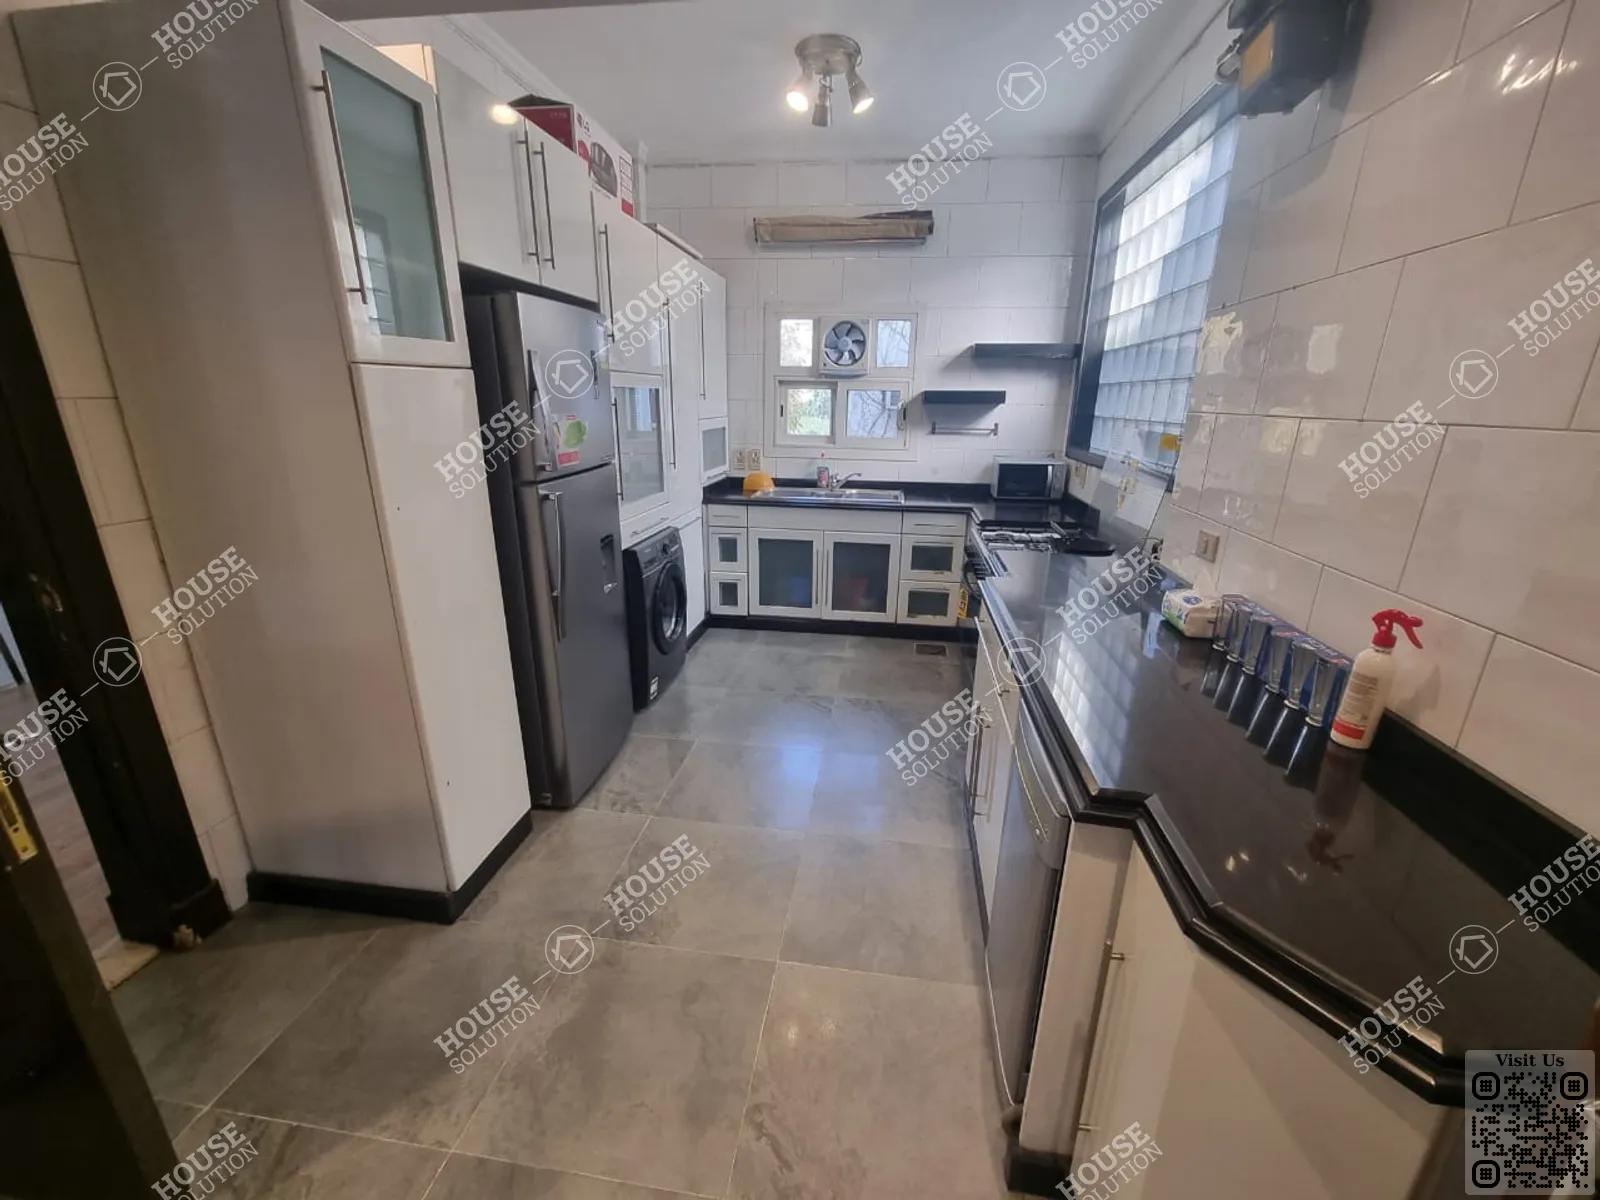 KITCHEN  @ Apartments For Rent In Maadi Maadi Sarayat Area: 220 m² consists of 3 Bedrooms 3 Bathrooms Modern furnished 5 stars #5635-2